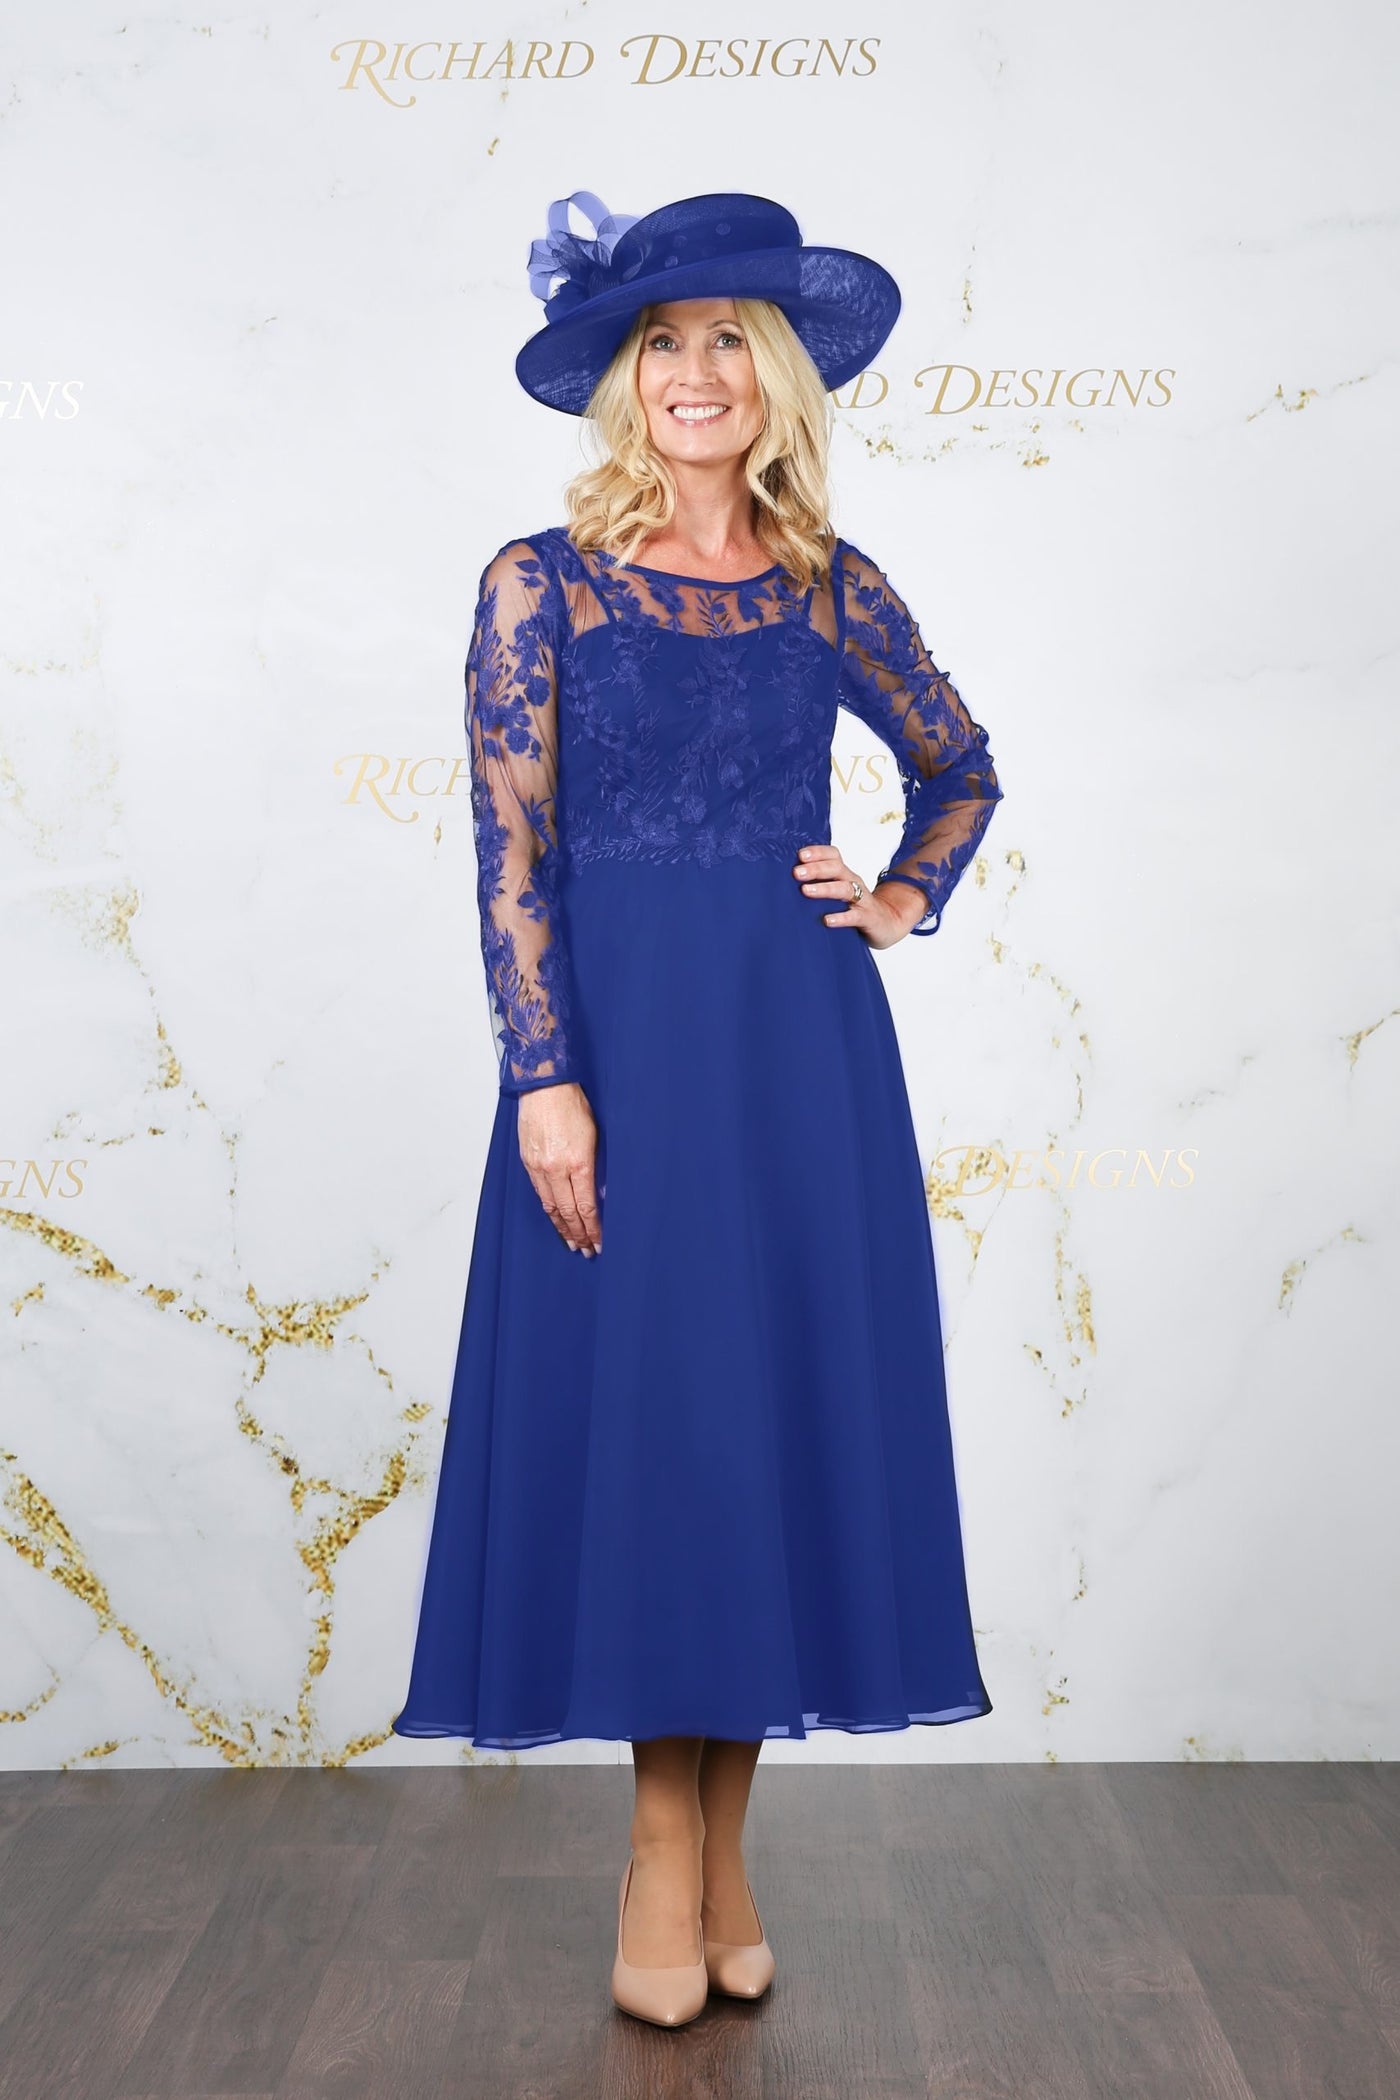 Royal Blue Dress with Floral Mesh Top & Sleeves With Chiffon Skirt